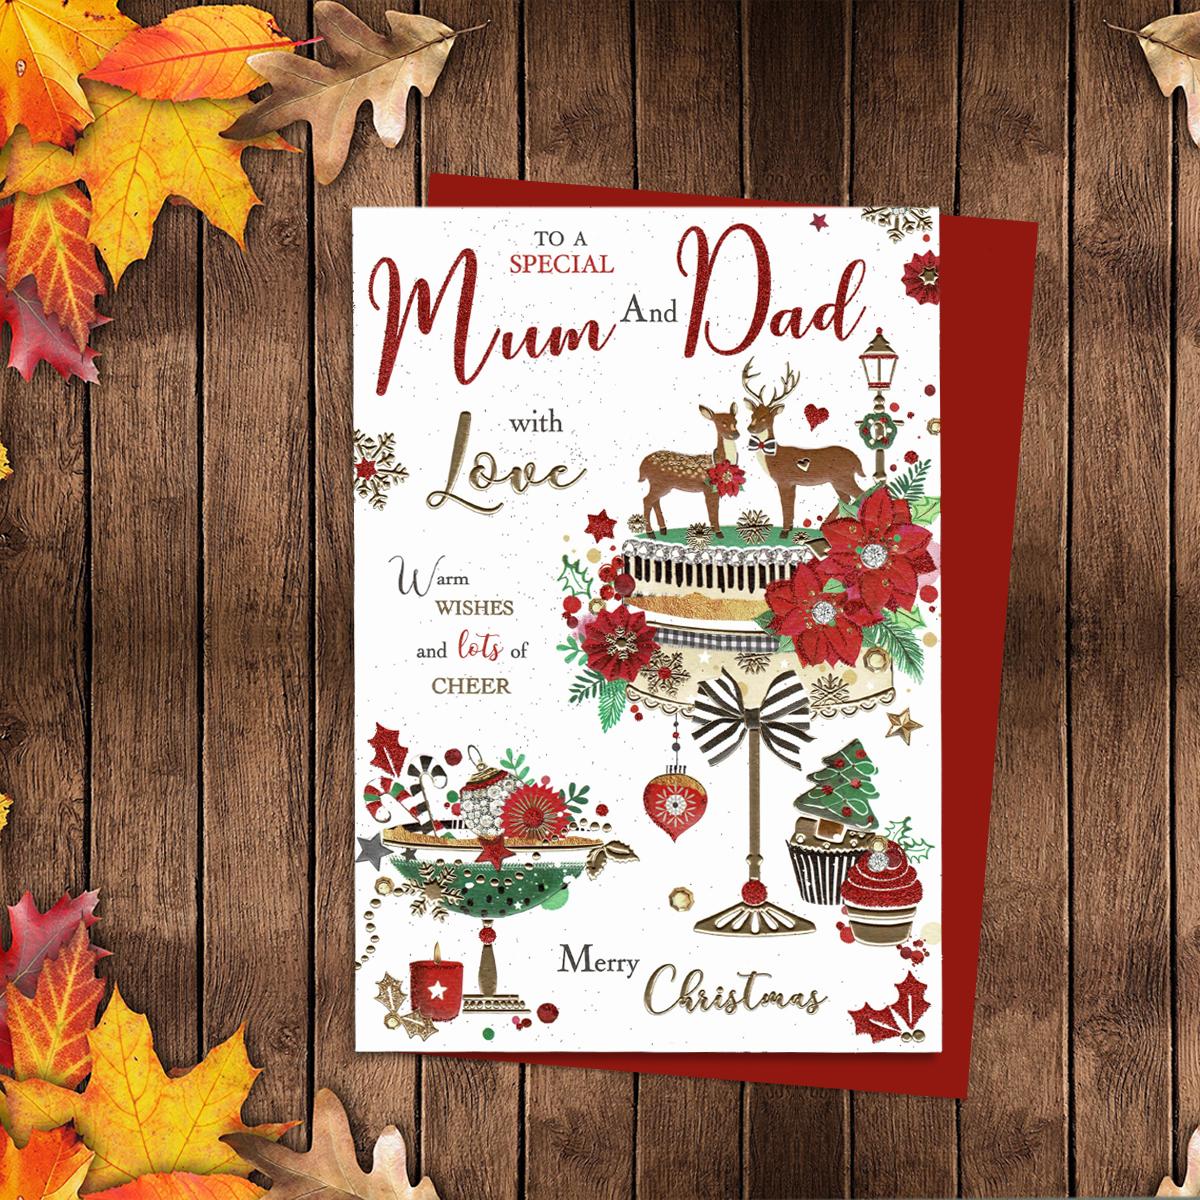 To A Special Mum And Dad With Love Featuring A Beautiful Christmas Cake On A Cake Stand. Finished With Red Glitter, Gold Foiling And A Red Envelope